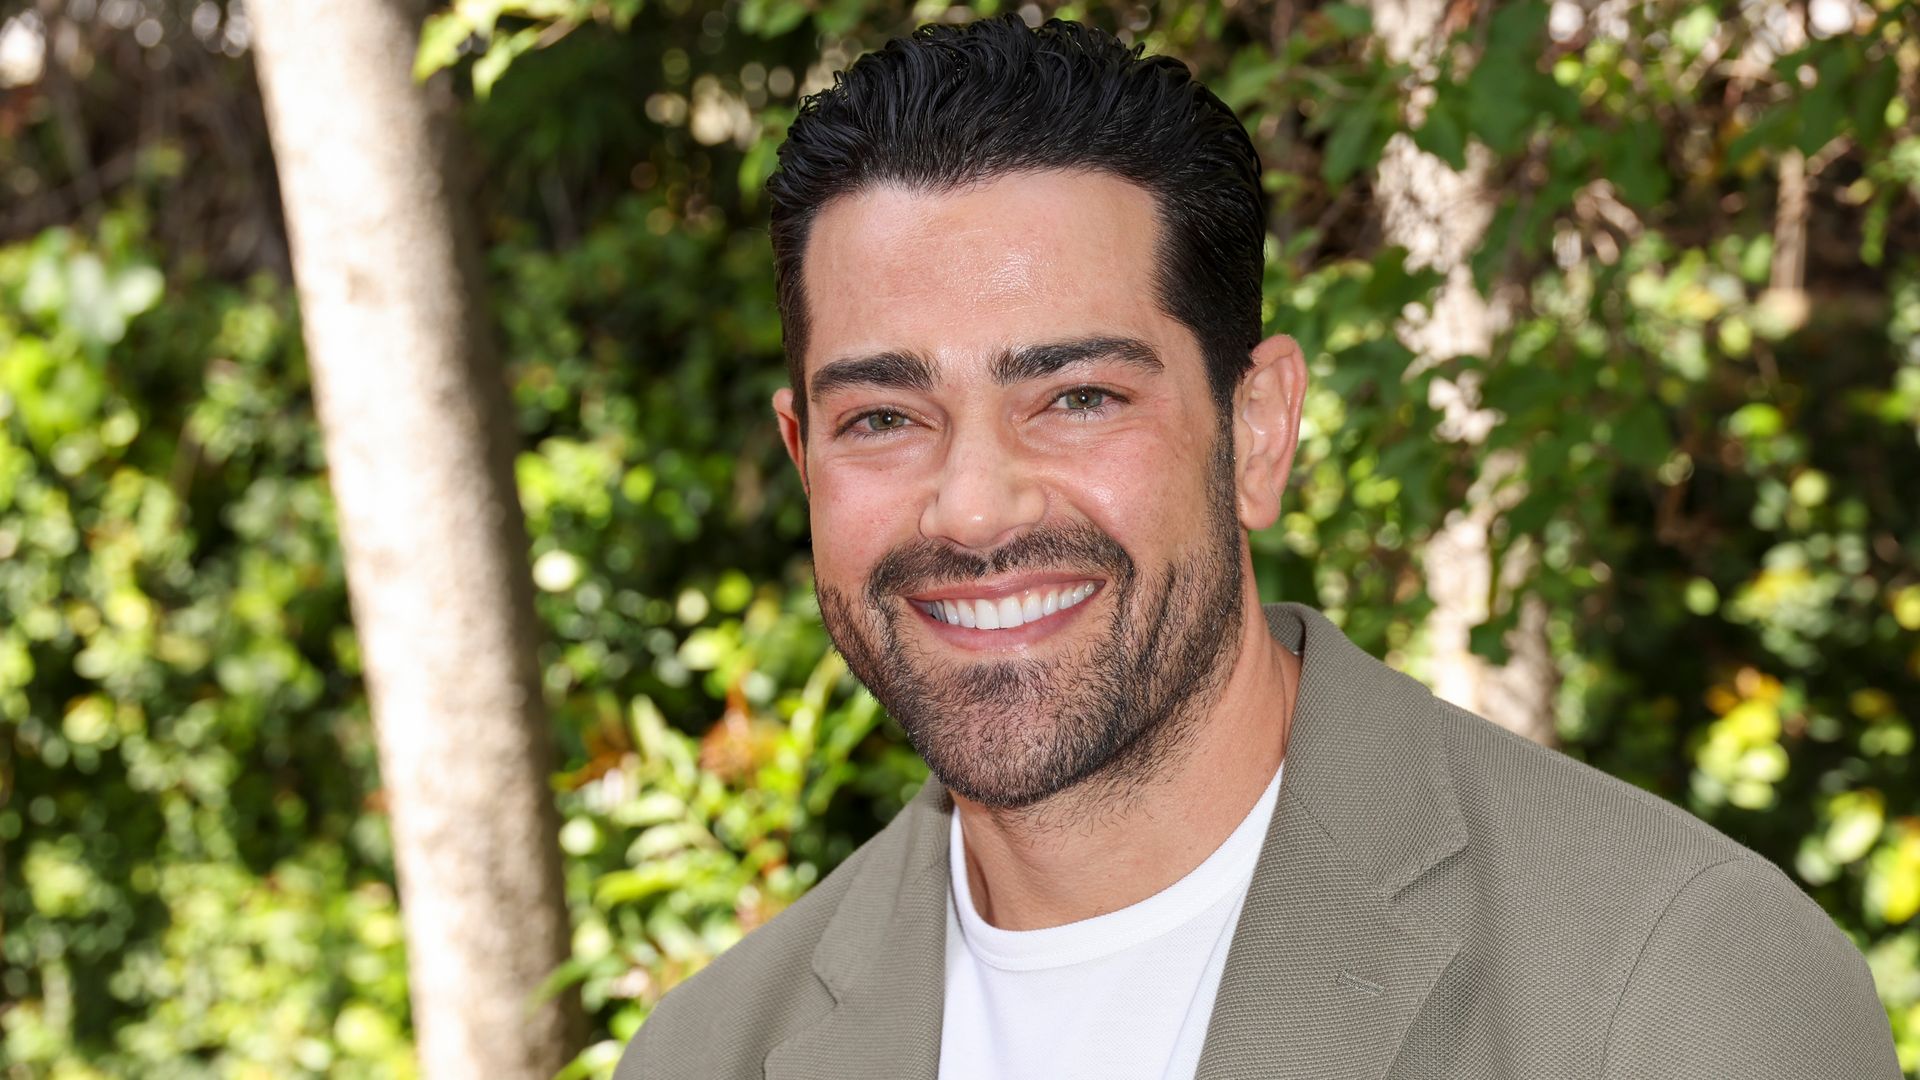 Exclusive: Desperate Housewives star Jesse Metcalfe to launch his own skincare line